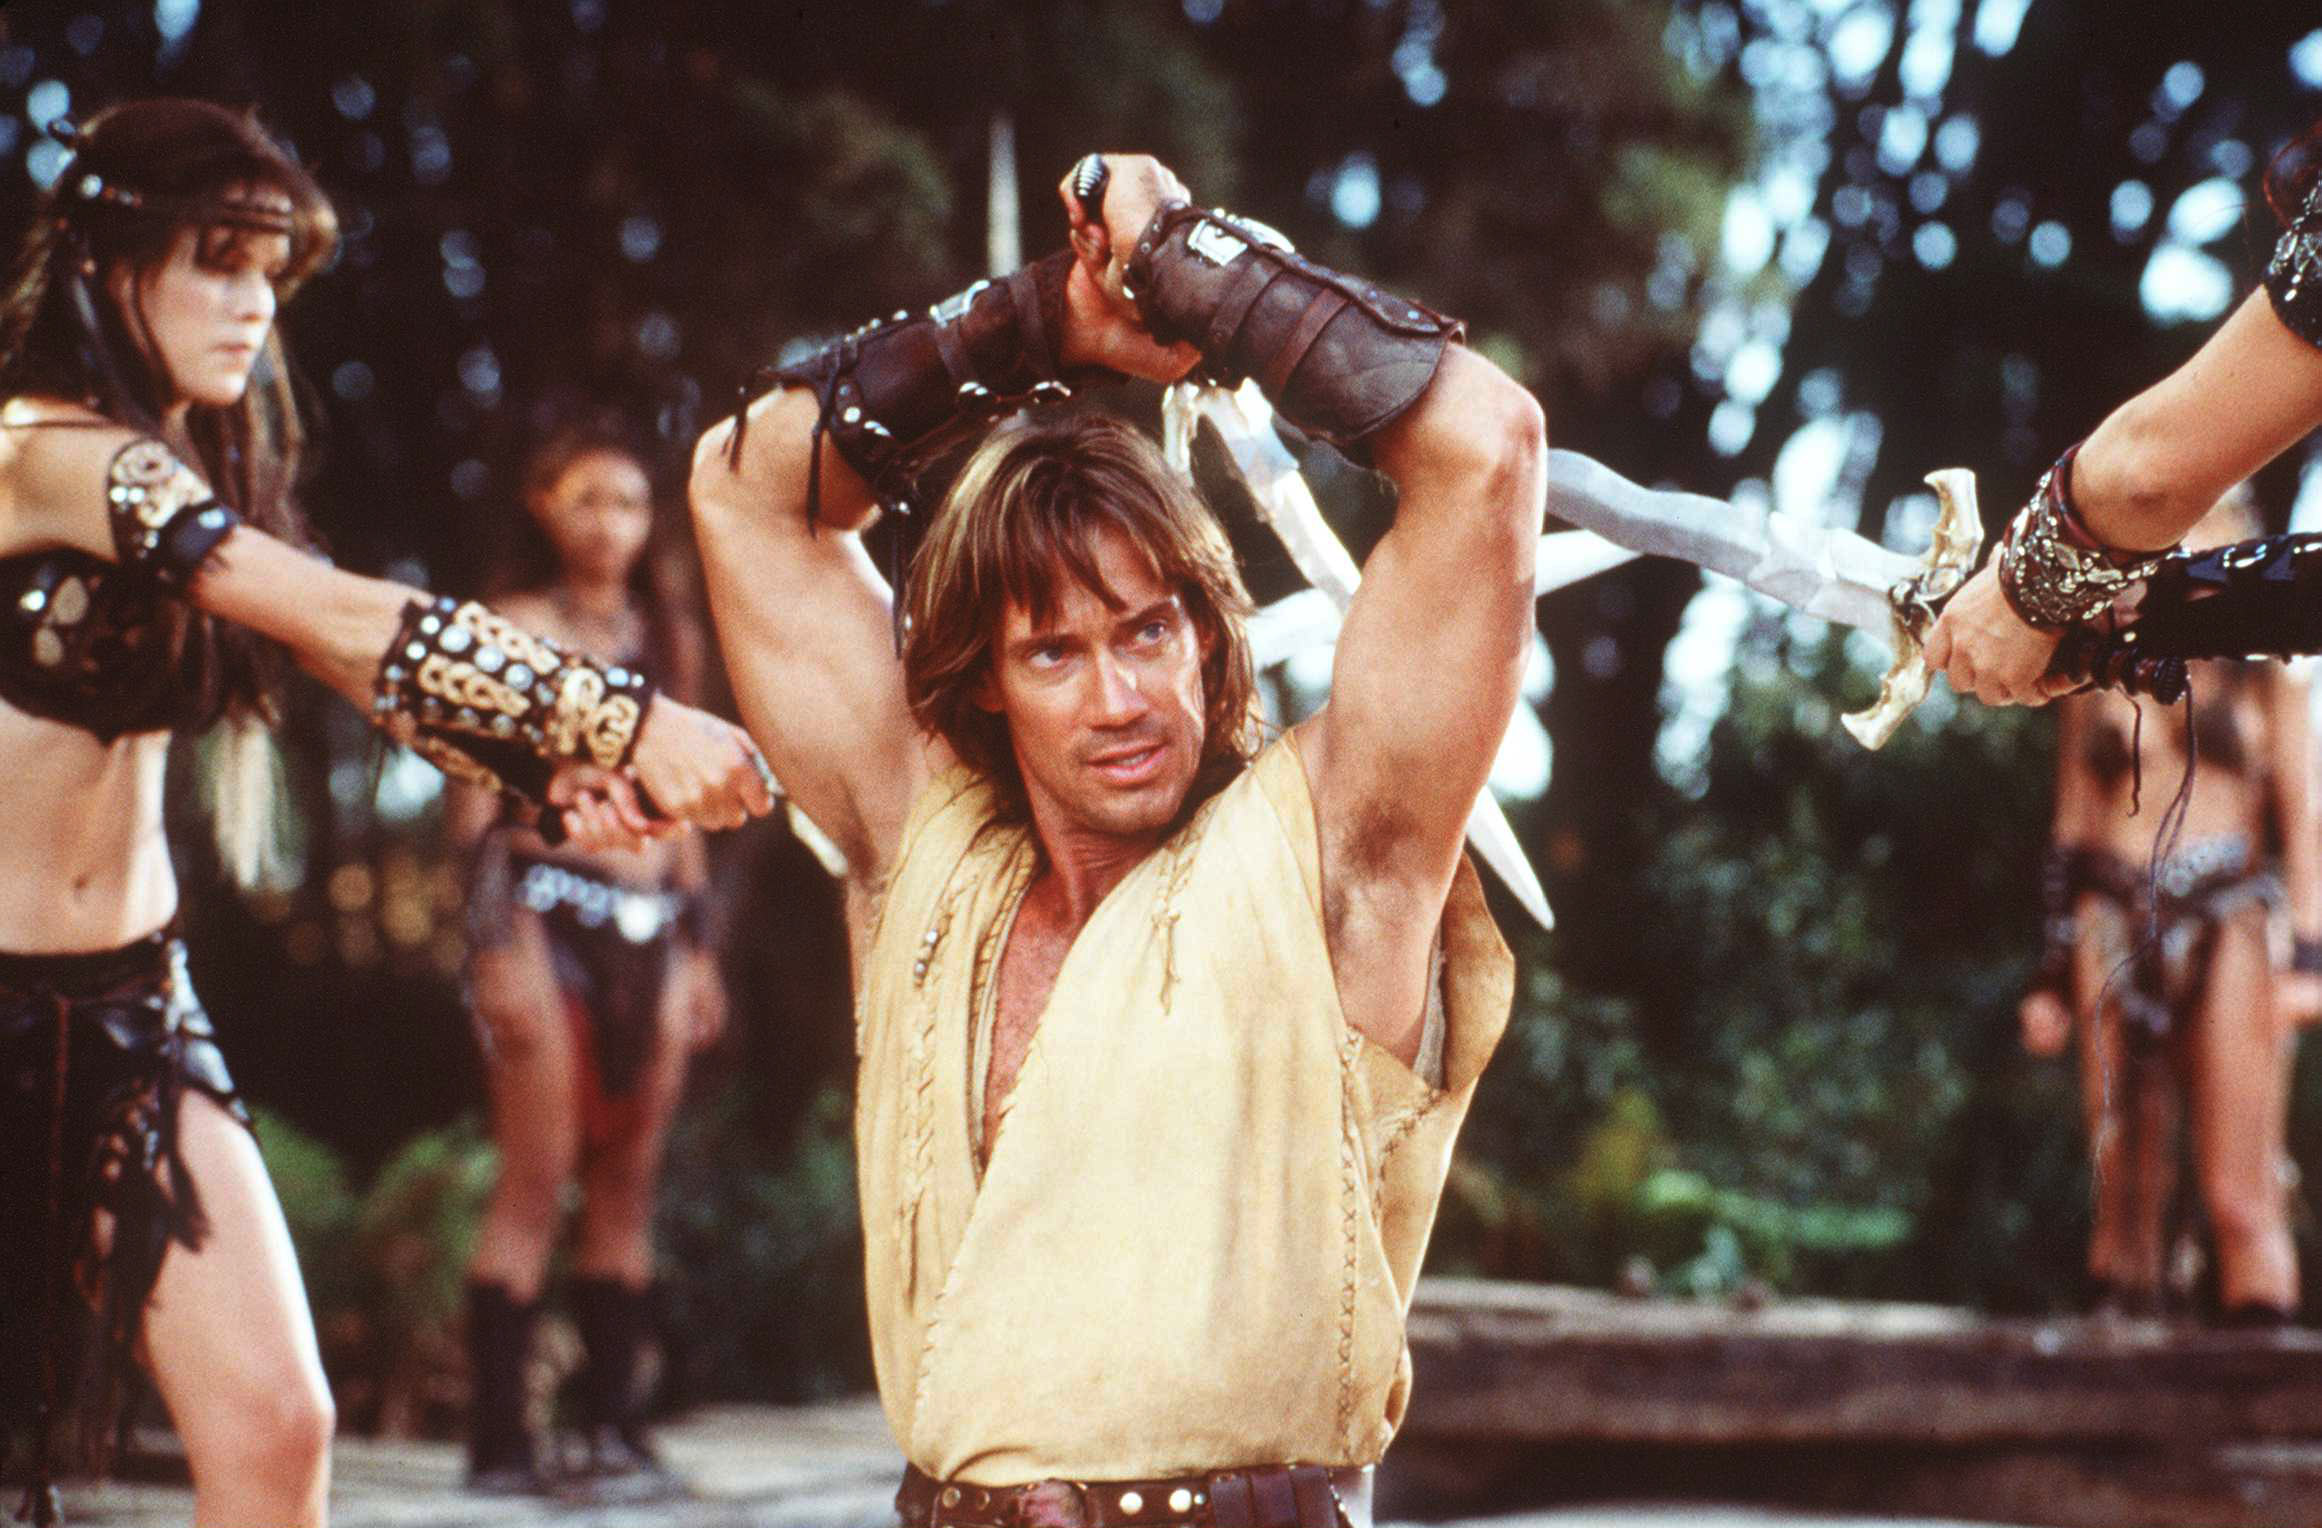 PHOTO: Actor Kevin Sorbo played Hercules in a 1990's television series. Sorbo endorsed Louisiana Gov. Bobby Jindal at the Conservative Political Action Conference this year.